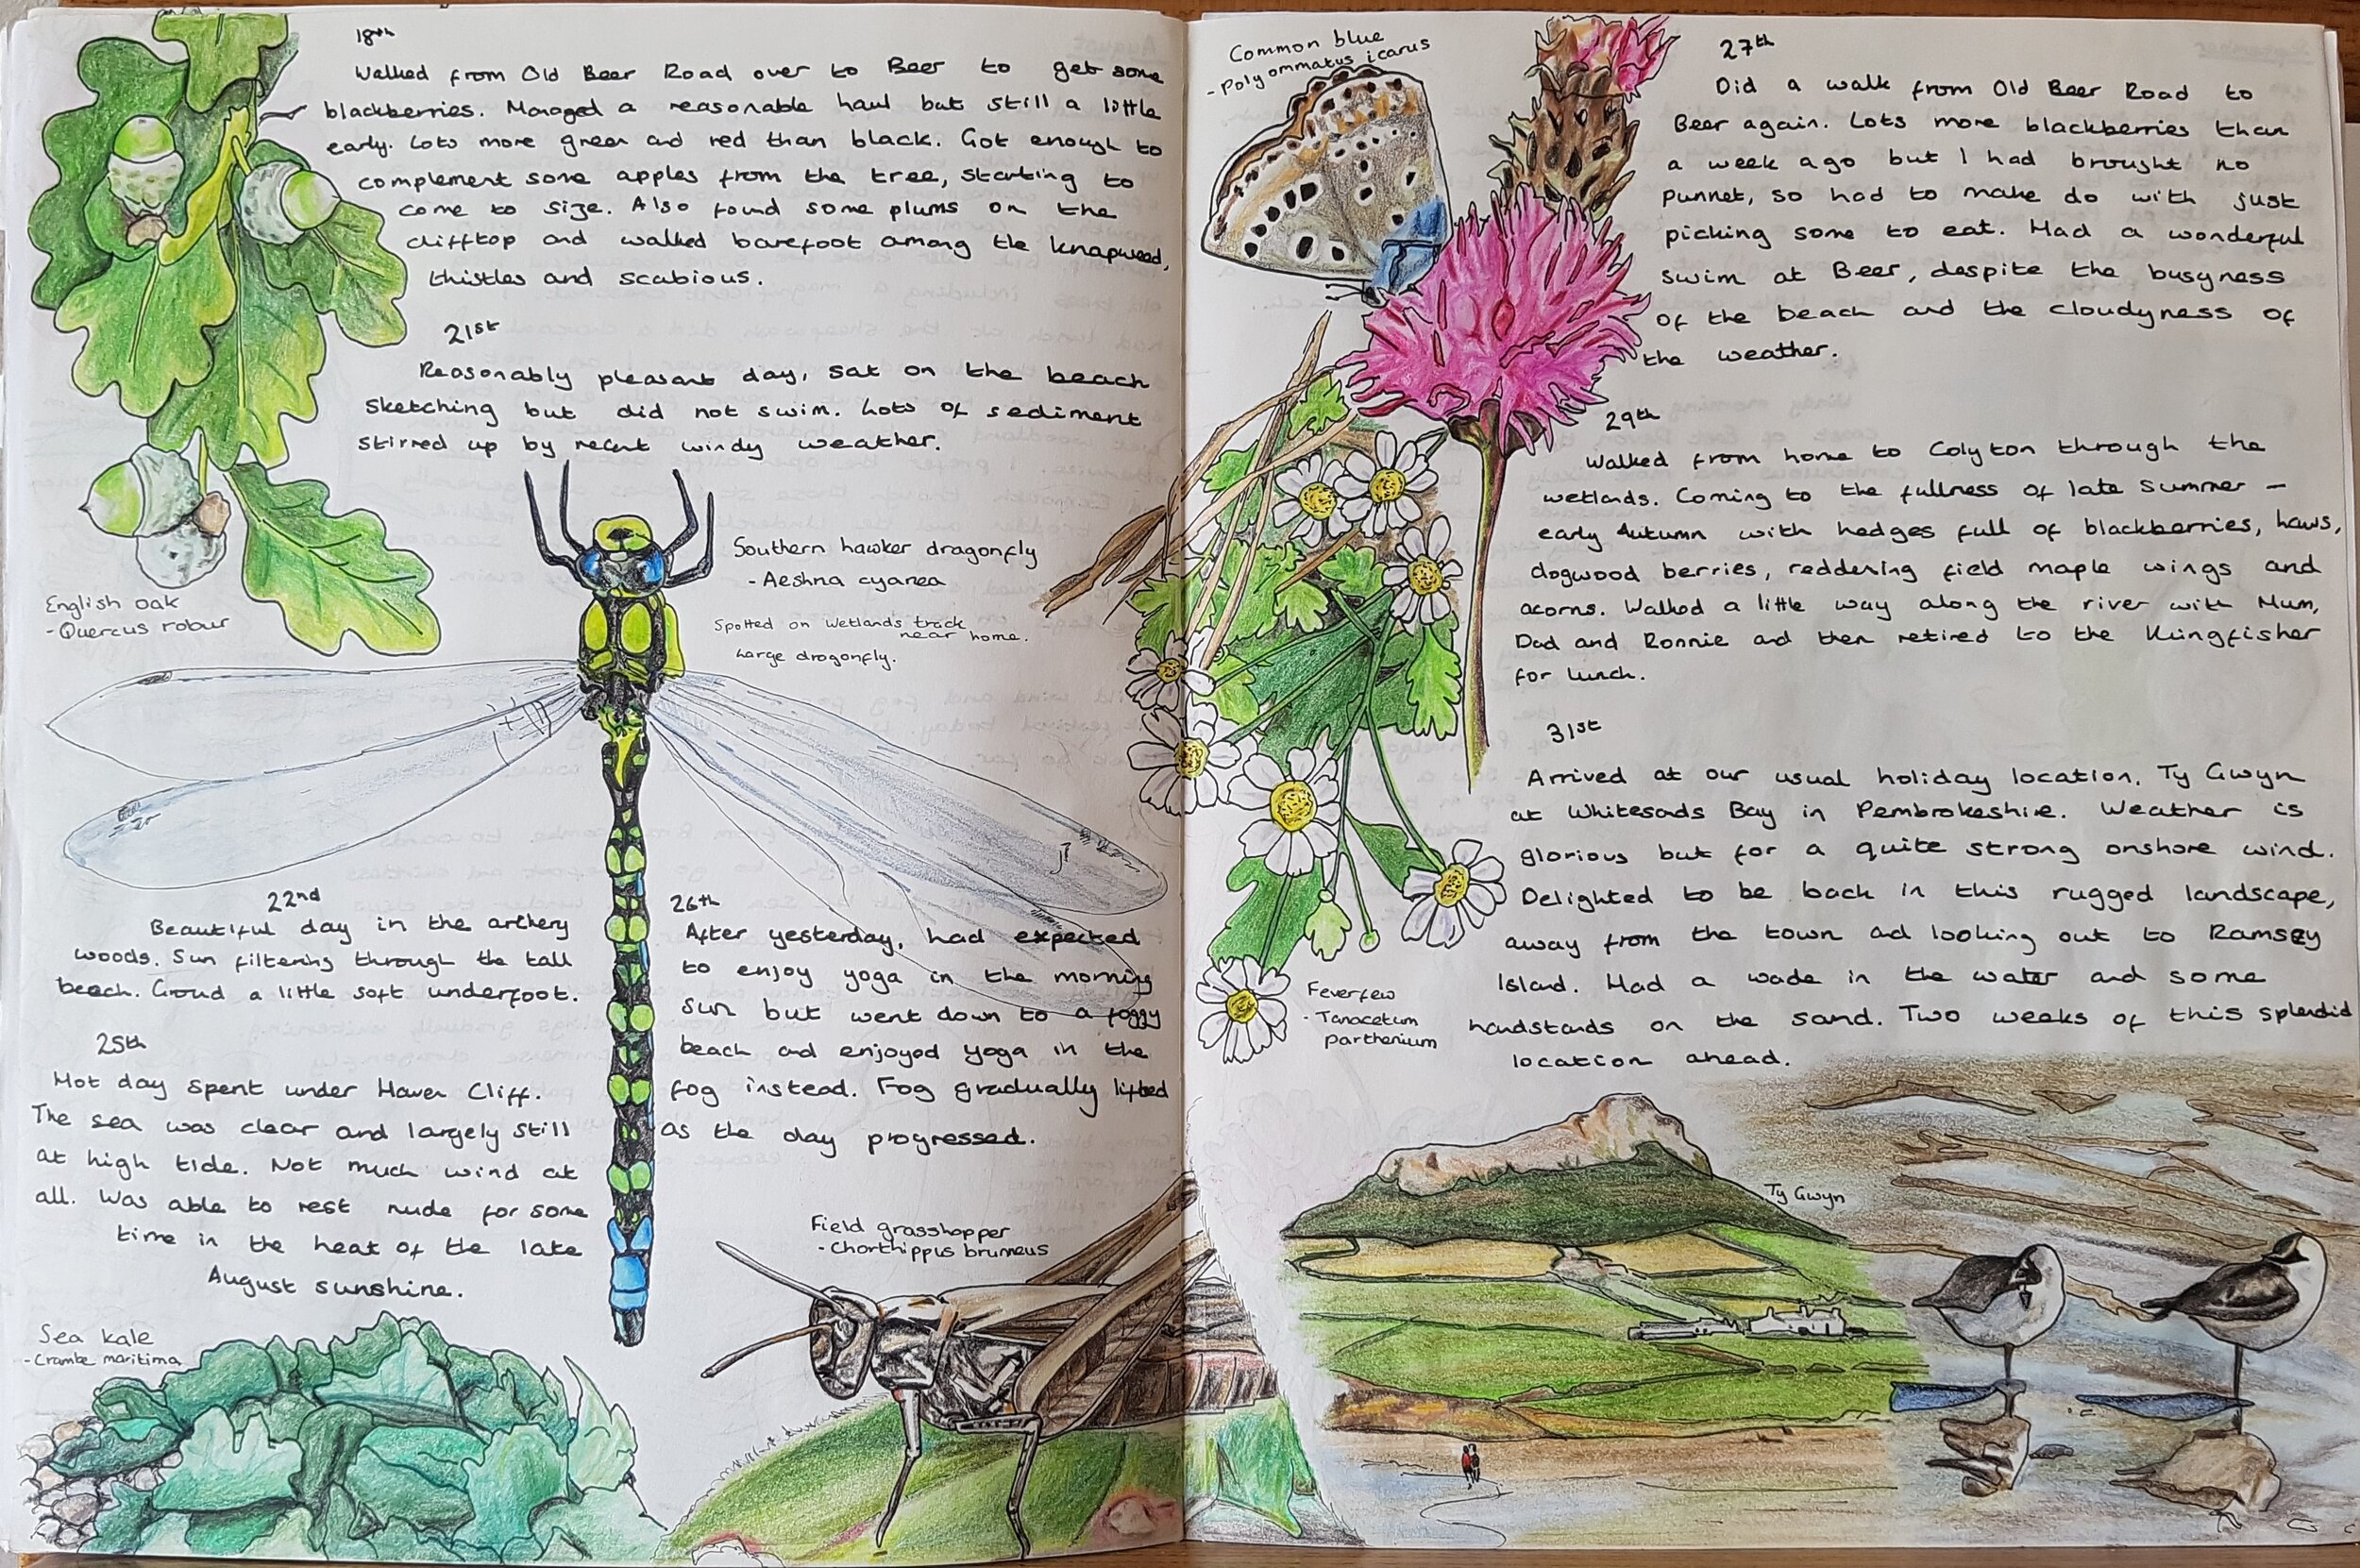 Easy Nature Journals for Perfect for Summer Nature Walks